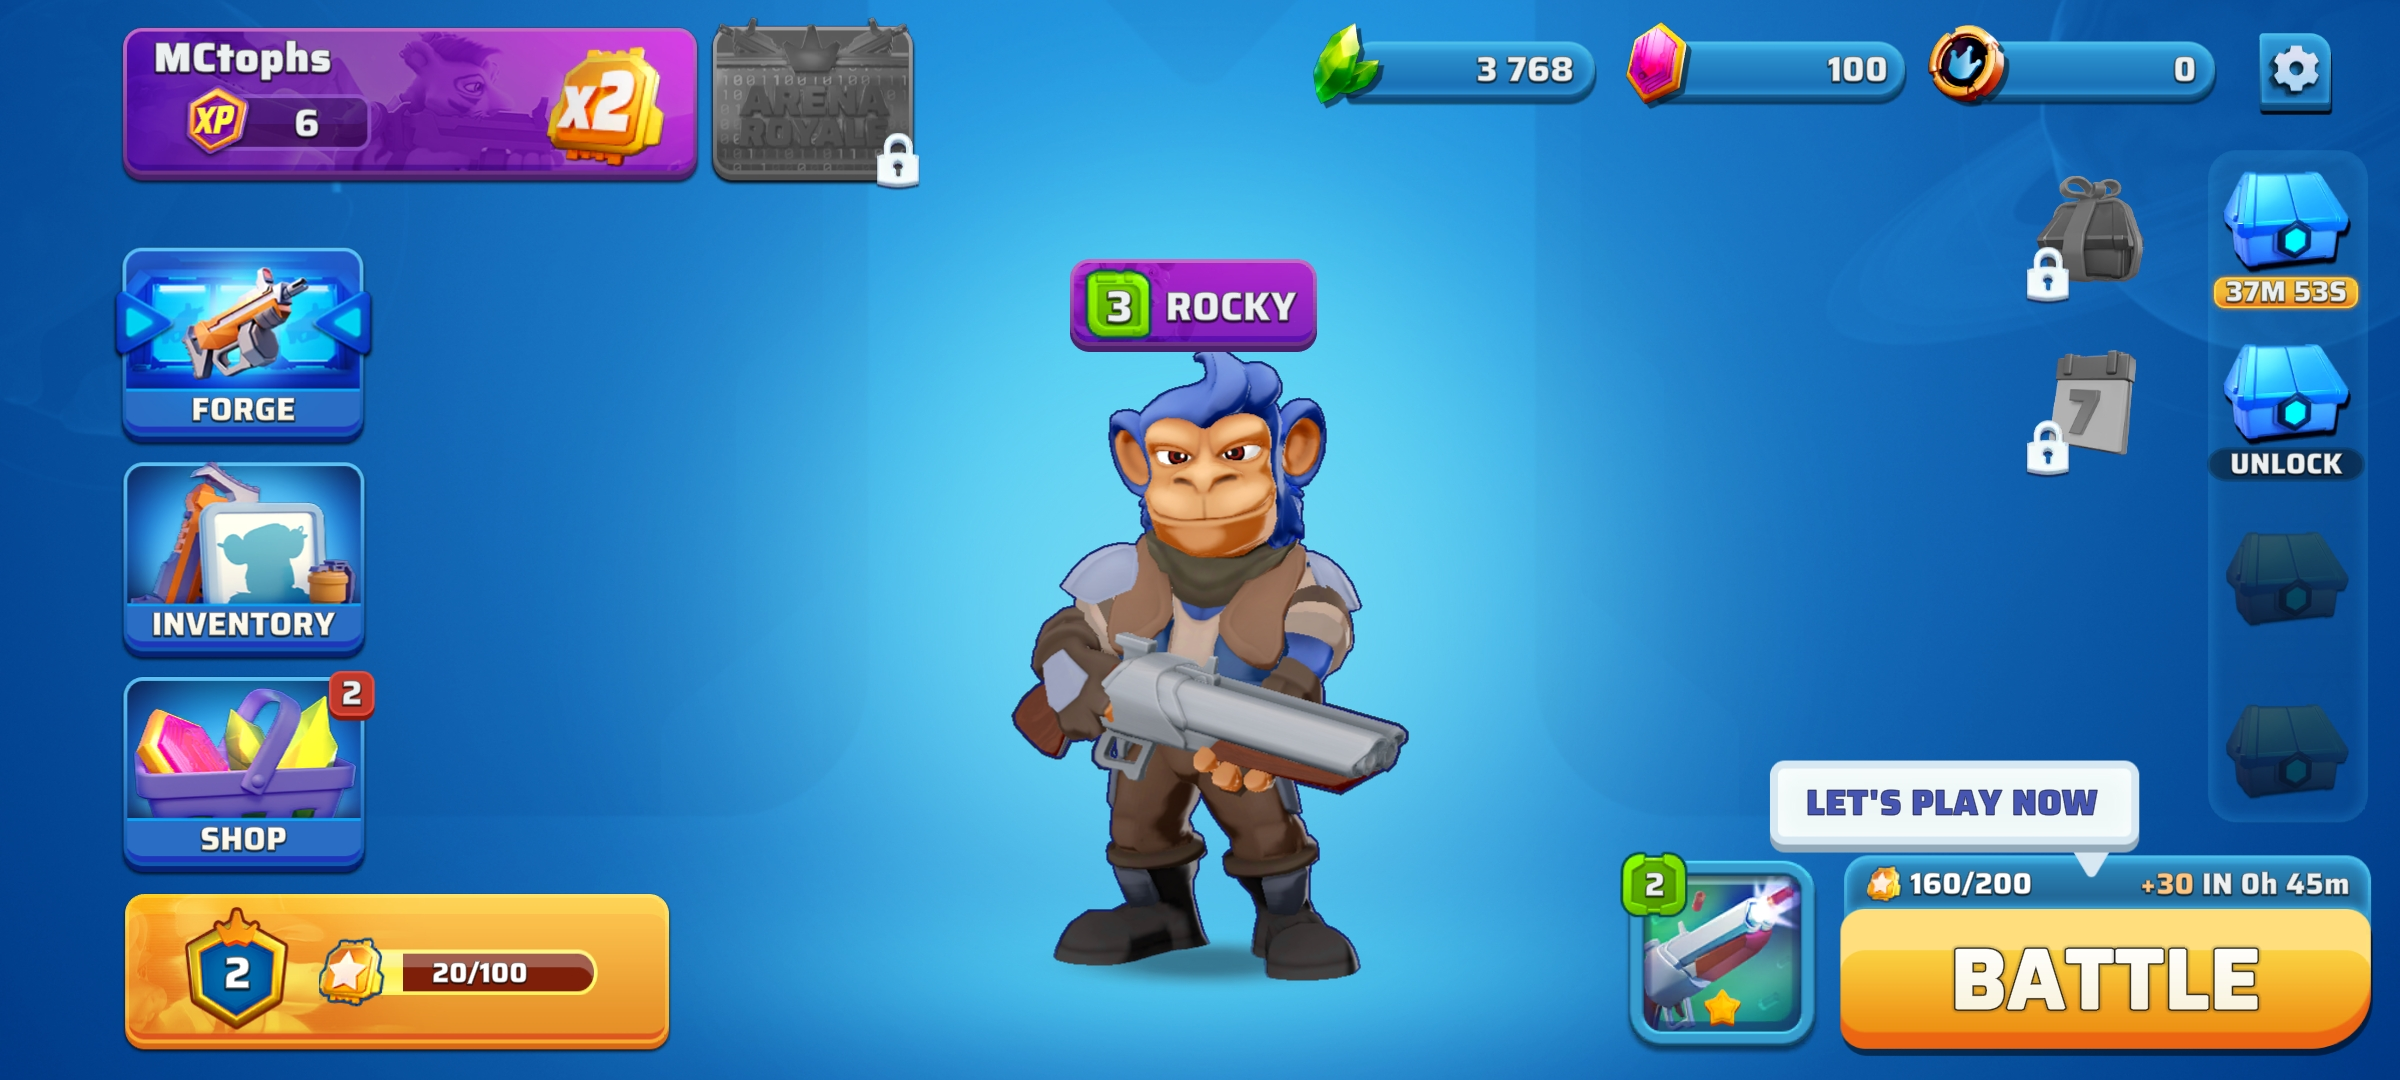 Cantina Royale homescreen serves as the lobby when opening the game, displaying your character in the game along with other features that players can explore.